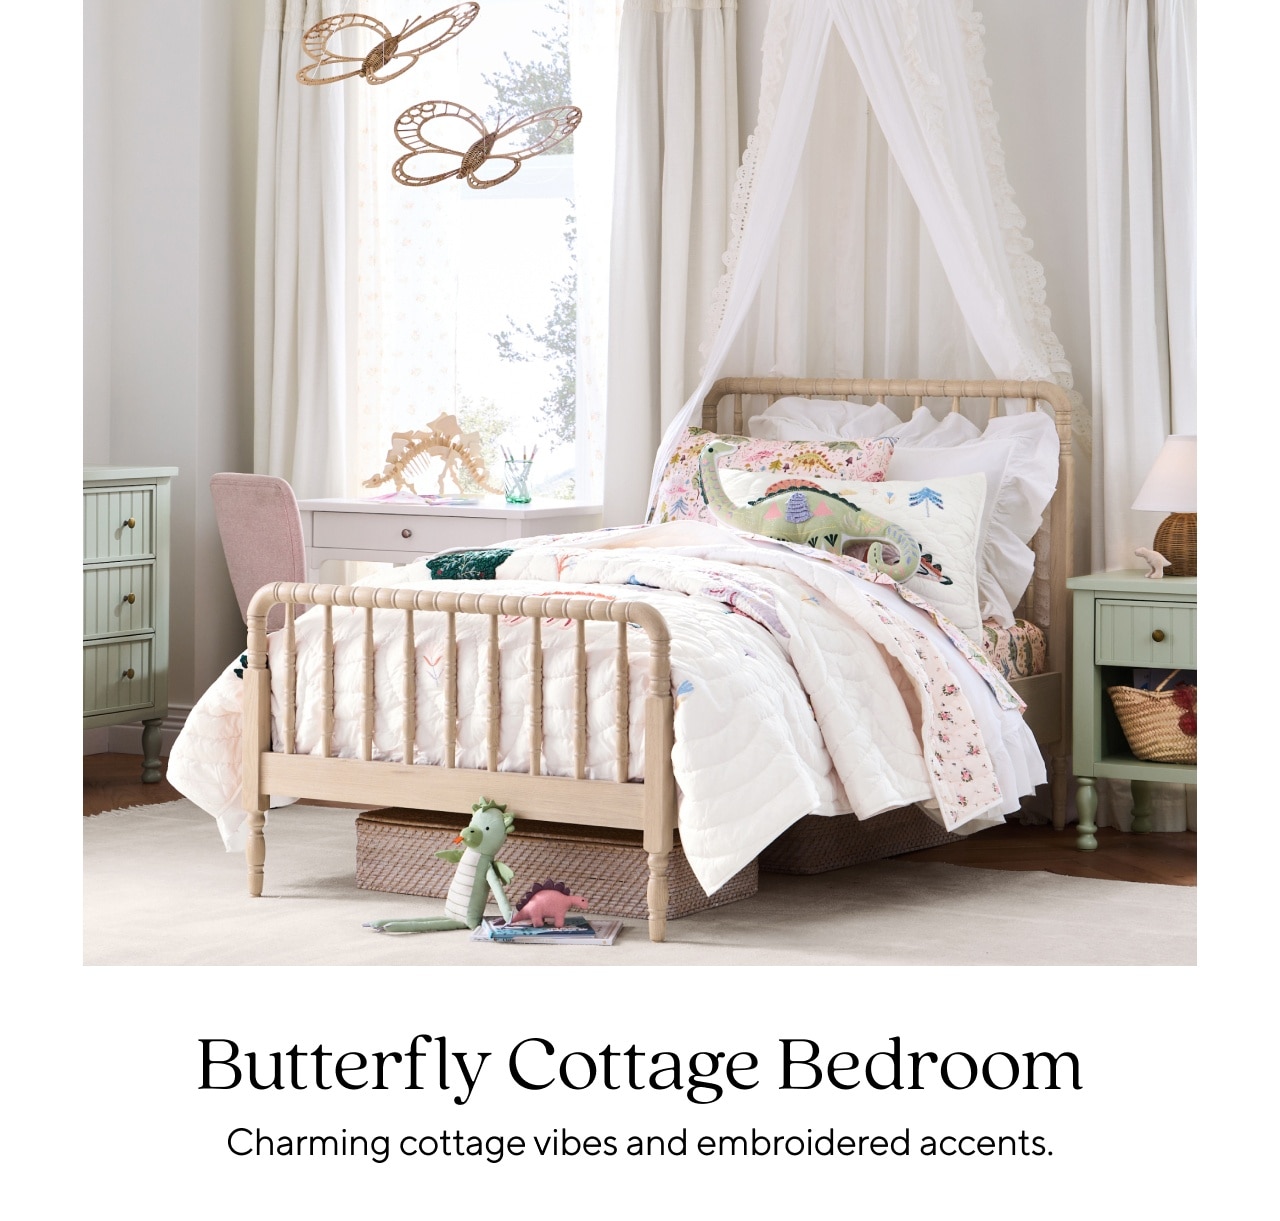 BUTTERFLY COTTAGE BEDROOM